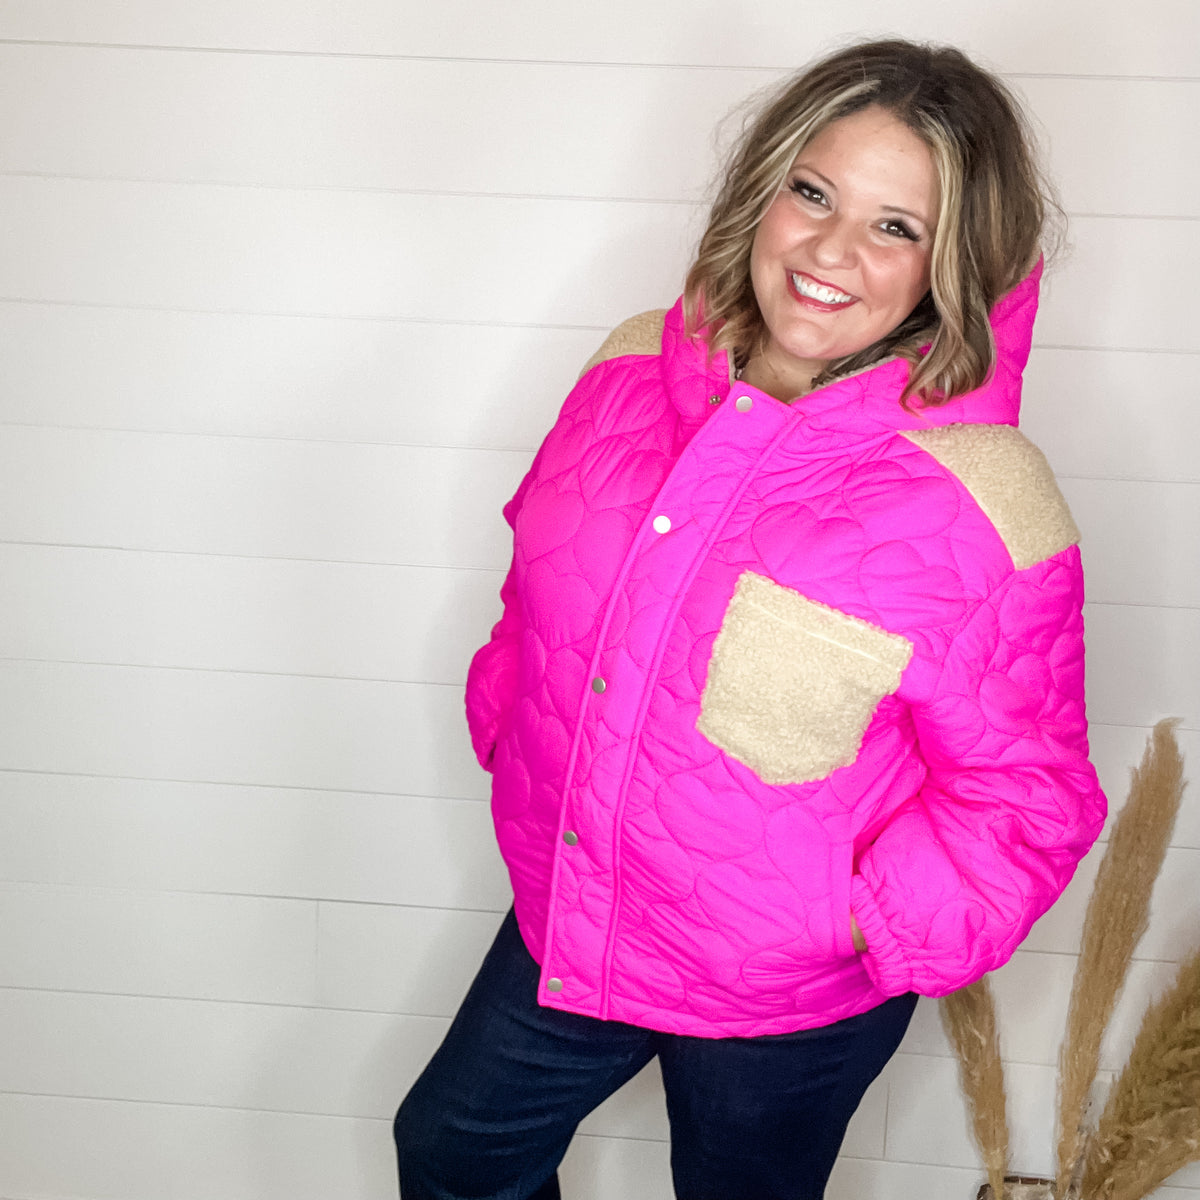 "I Heart You" Heart Quilted Jacket with Sherpa Details